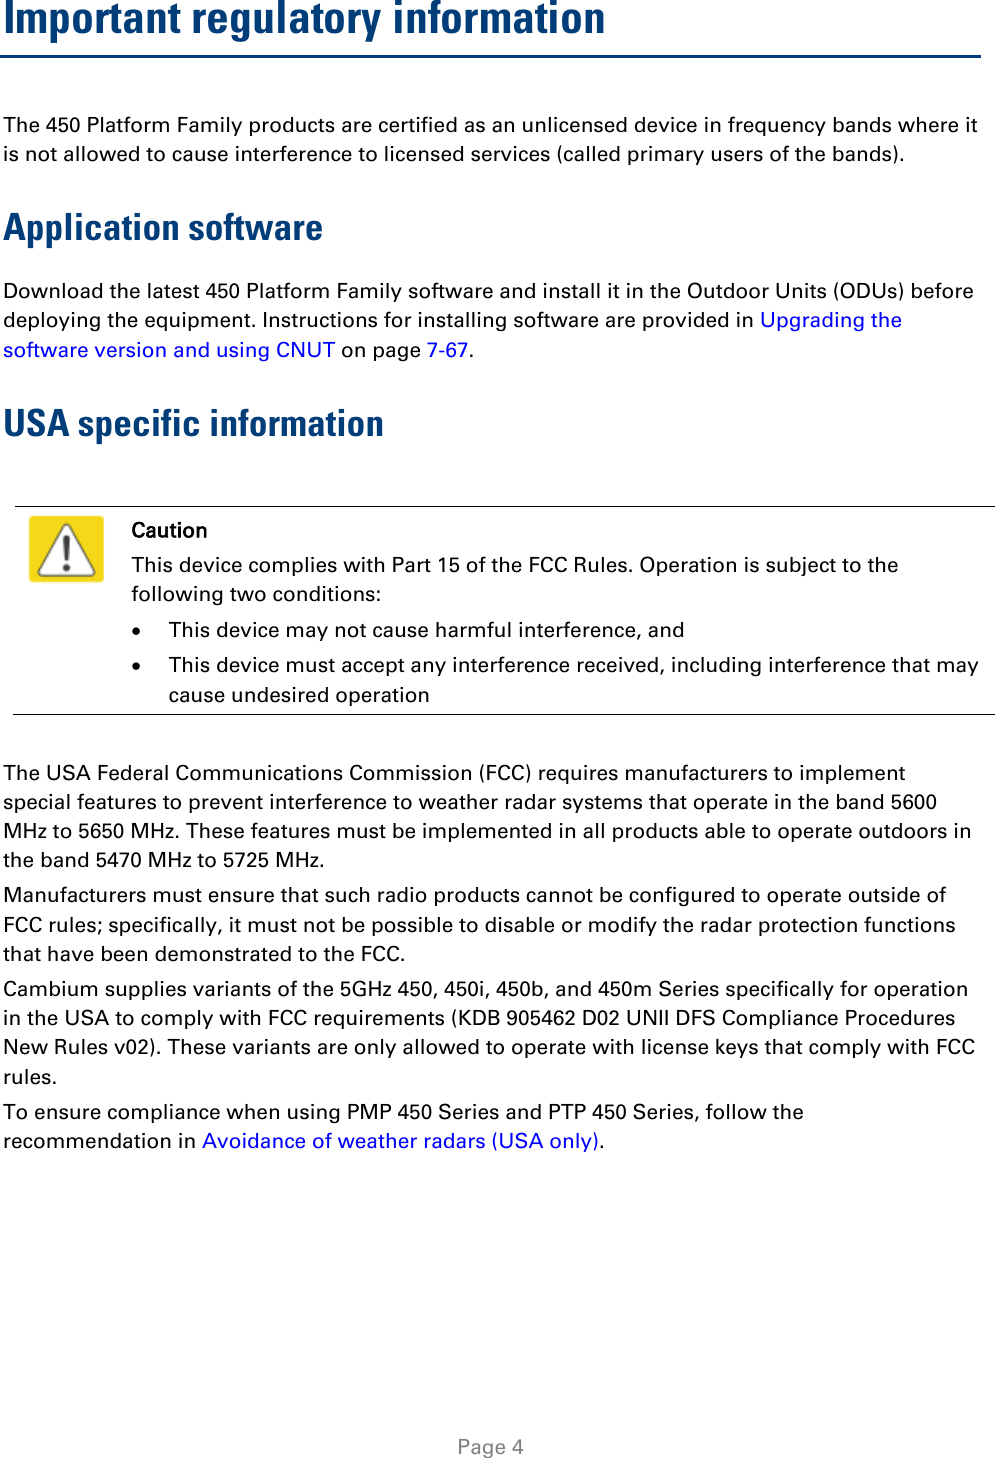   Page 4 Important regulatory information The 450 Platform Family products are certified as an unlicensed device in frequency bands where it is not allowed to cause interference to licensed services (called primary users of the bands). Application software Download the latest 450 Platform Family software and install it in the Outdoor Units (ODUs) before deploying the equipment. Instructions for installing software are provided in Upgrading the software version and using CNUT on page 7-67. USA specific information   Caution This device complies with Part 15 of the FCC Rules. Operation is subject to the following two conditions: • This device may not cause harmful interference, and • This device must accept any interference received, including interference that may cause undesired operation  The USA Federal Communications Commission (FCC) requires manufacturers to implement special features to prevent interference to weather radar systems that operate in the band 5600 MHz to 5650 MHz. These features must be implemented in all products able to operate outdoors in the band 5470 MHz to 5725 MHz. Manufacturers must ensure that such radio products cannot be configured to operate outside of FCC rules; specifically, it must not be possible to disable or modify the radar protection functions that have been demonstrated to the FCC. Cambium supplies variants of the 5GHz 450, 450i, 450b, and 450m Series specifically for operation in the USA to comply with FCC requirements (KDB 905462 D02 UNII DFS Compliance Procedures New Rules v02). These variants are only allowed to operate with license keys that comply with FCC rules.  To ensure compliance when using PMP 450 Series and PTP 450 Series, follow the recommendation in Avoidance of weather radars (USA only).  